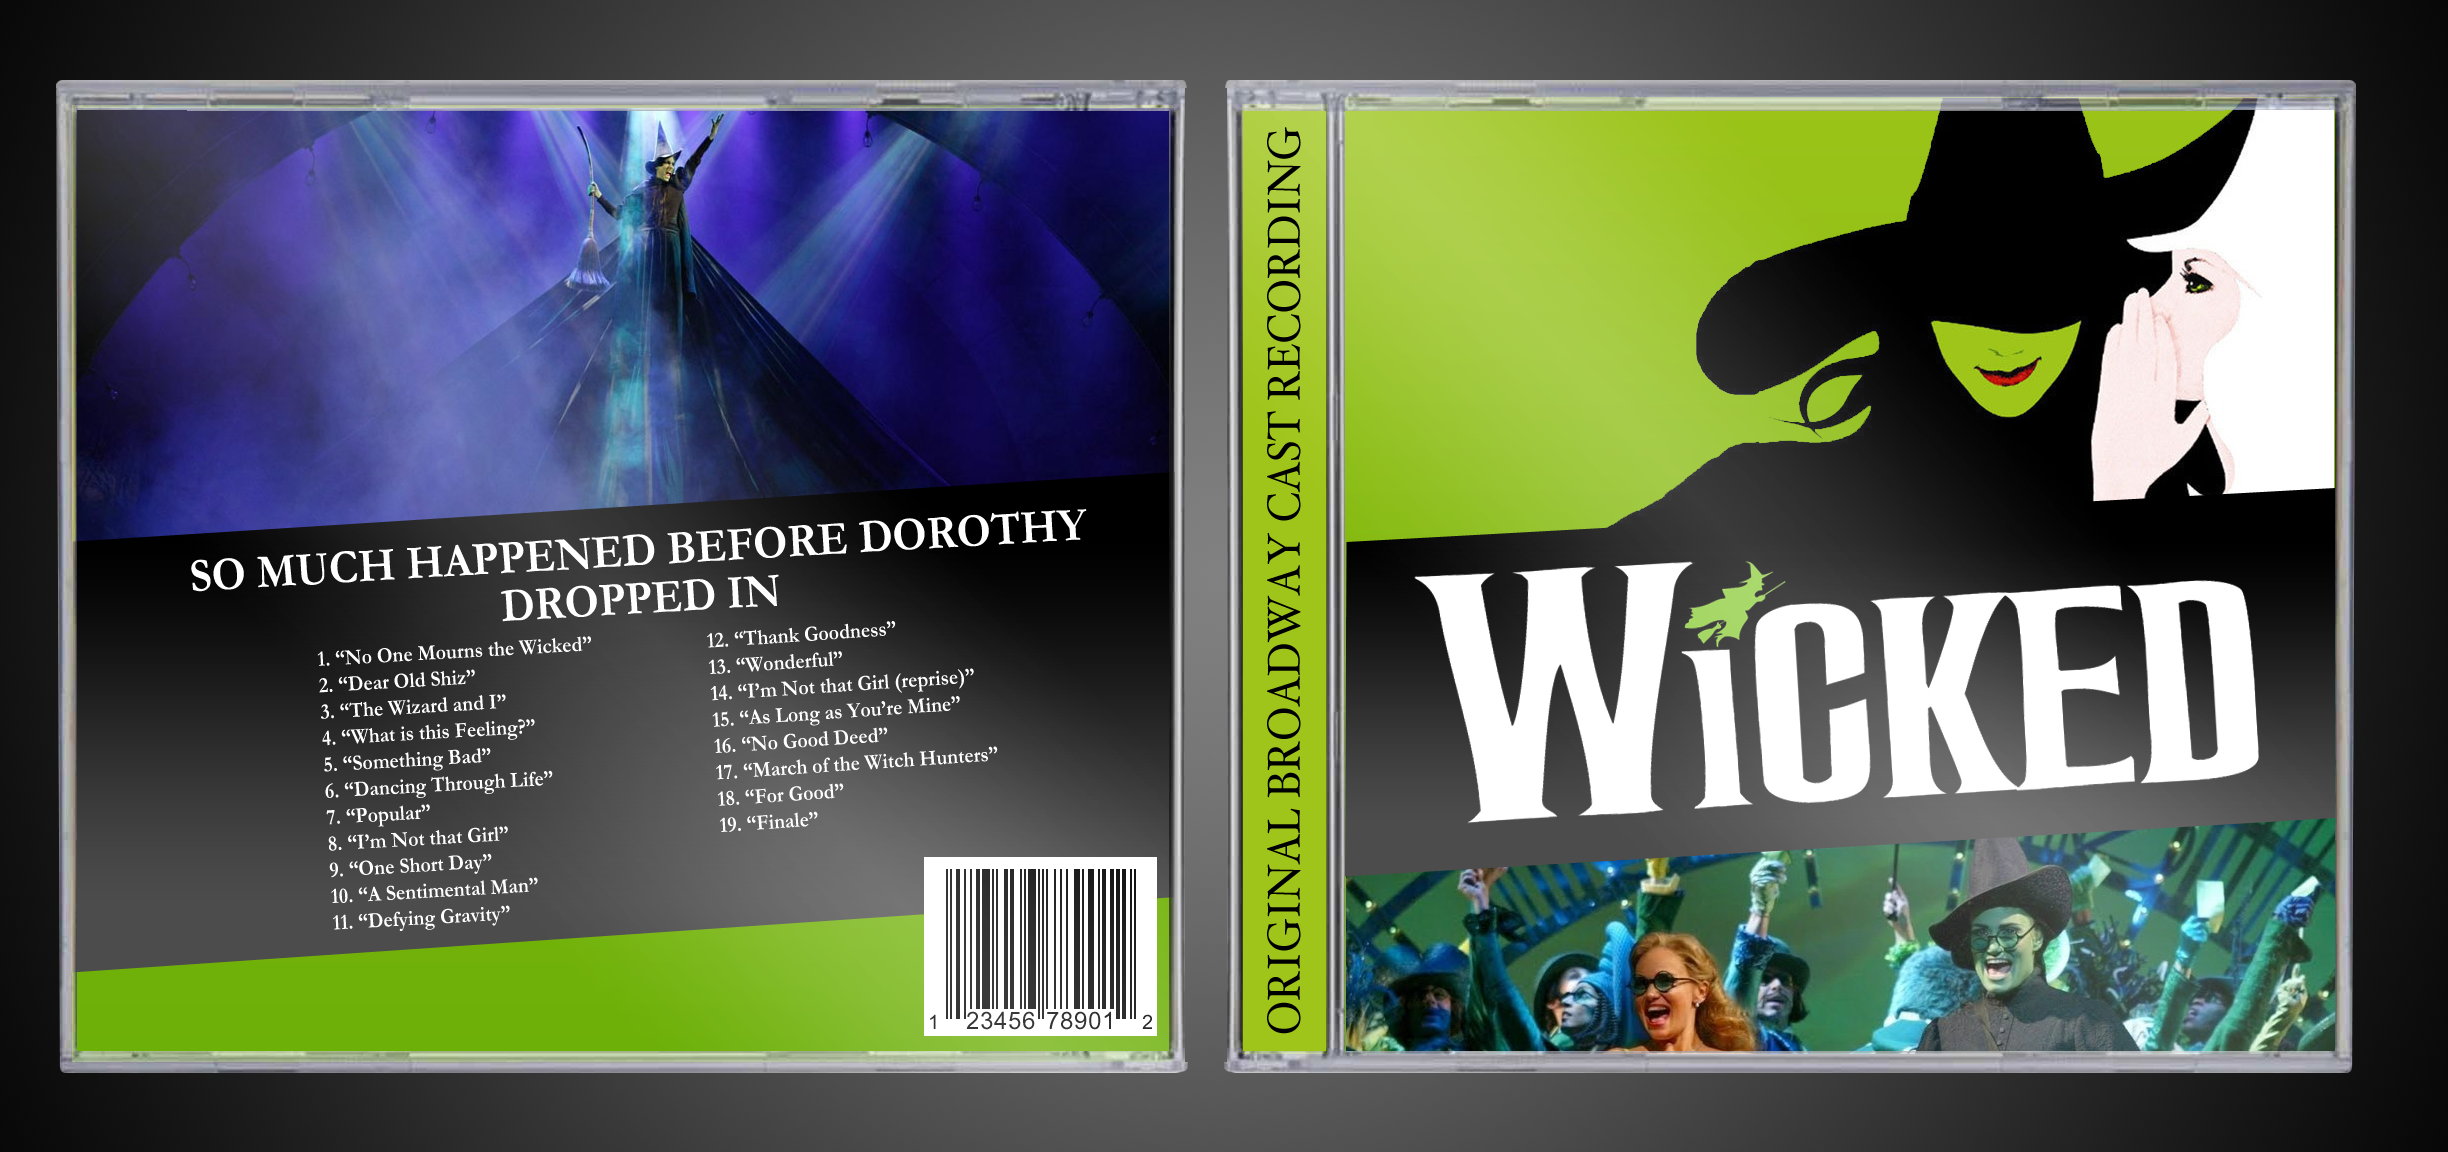 Wicked box cover